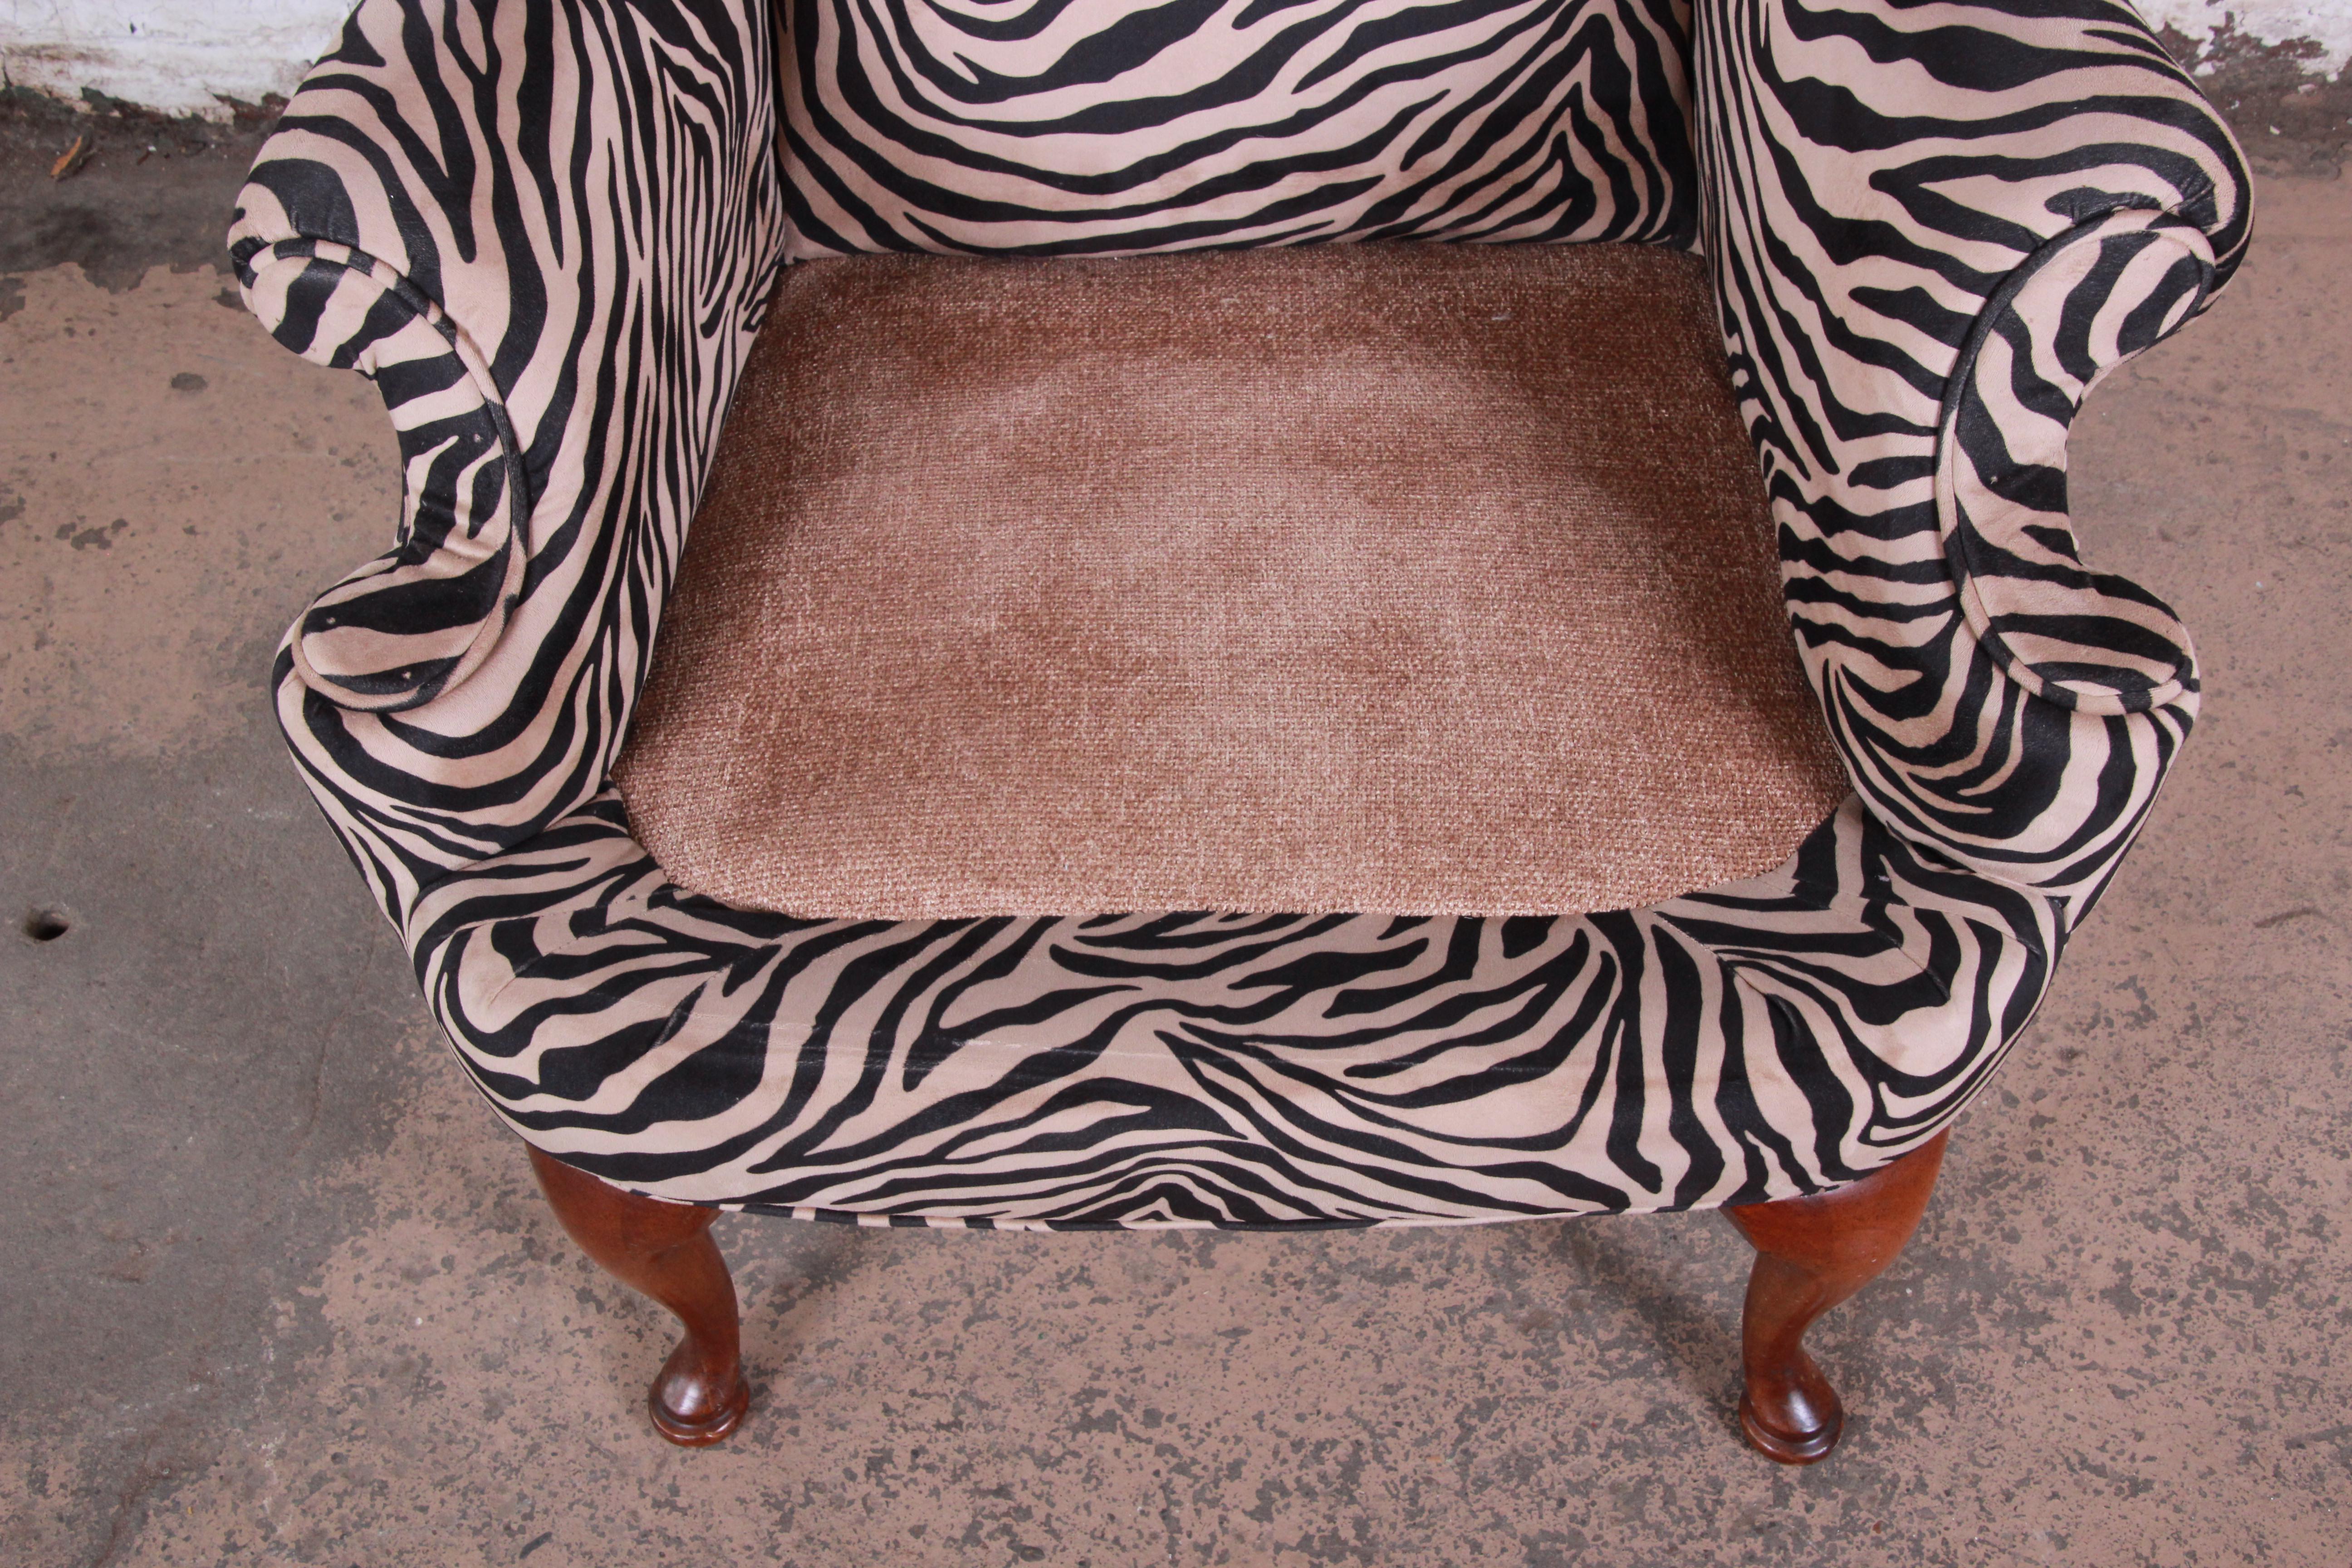 Queen Anne Style Wingback Lounge Chair and Ottoman in Zebra Print Upholstery 1